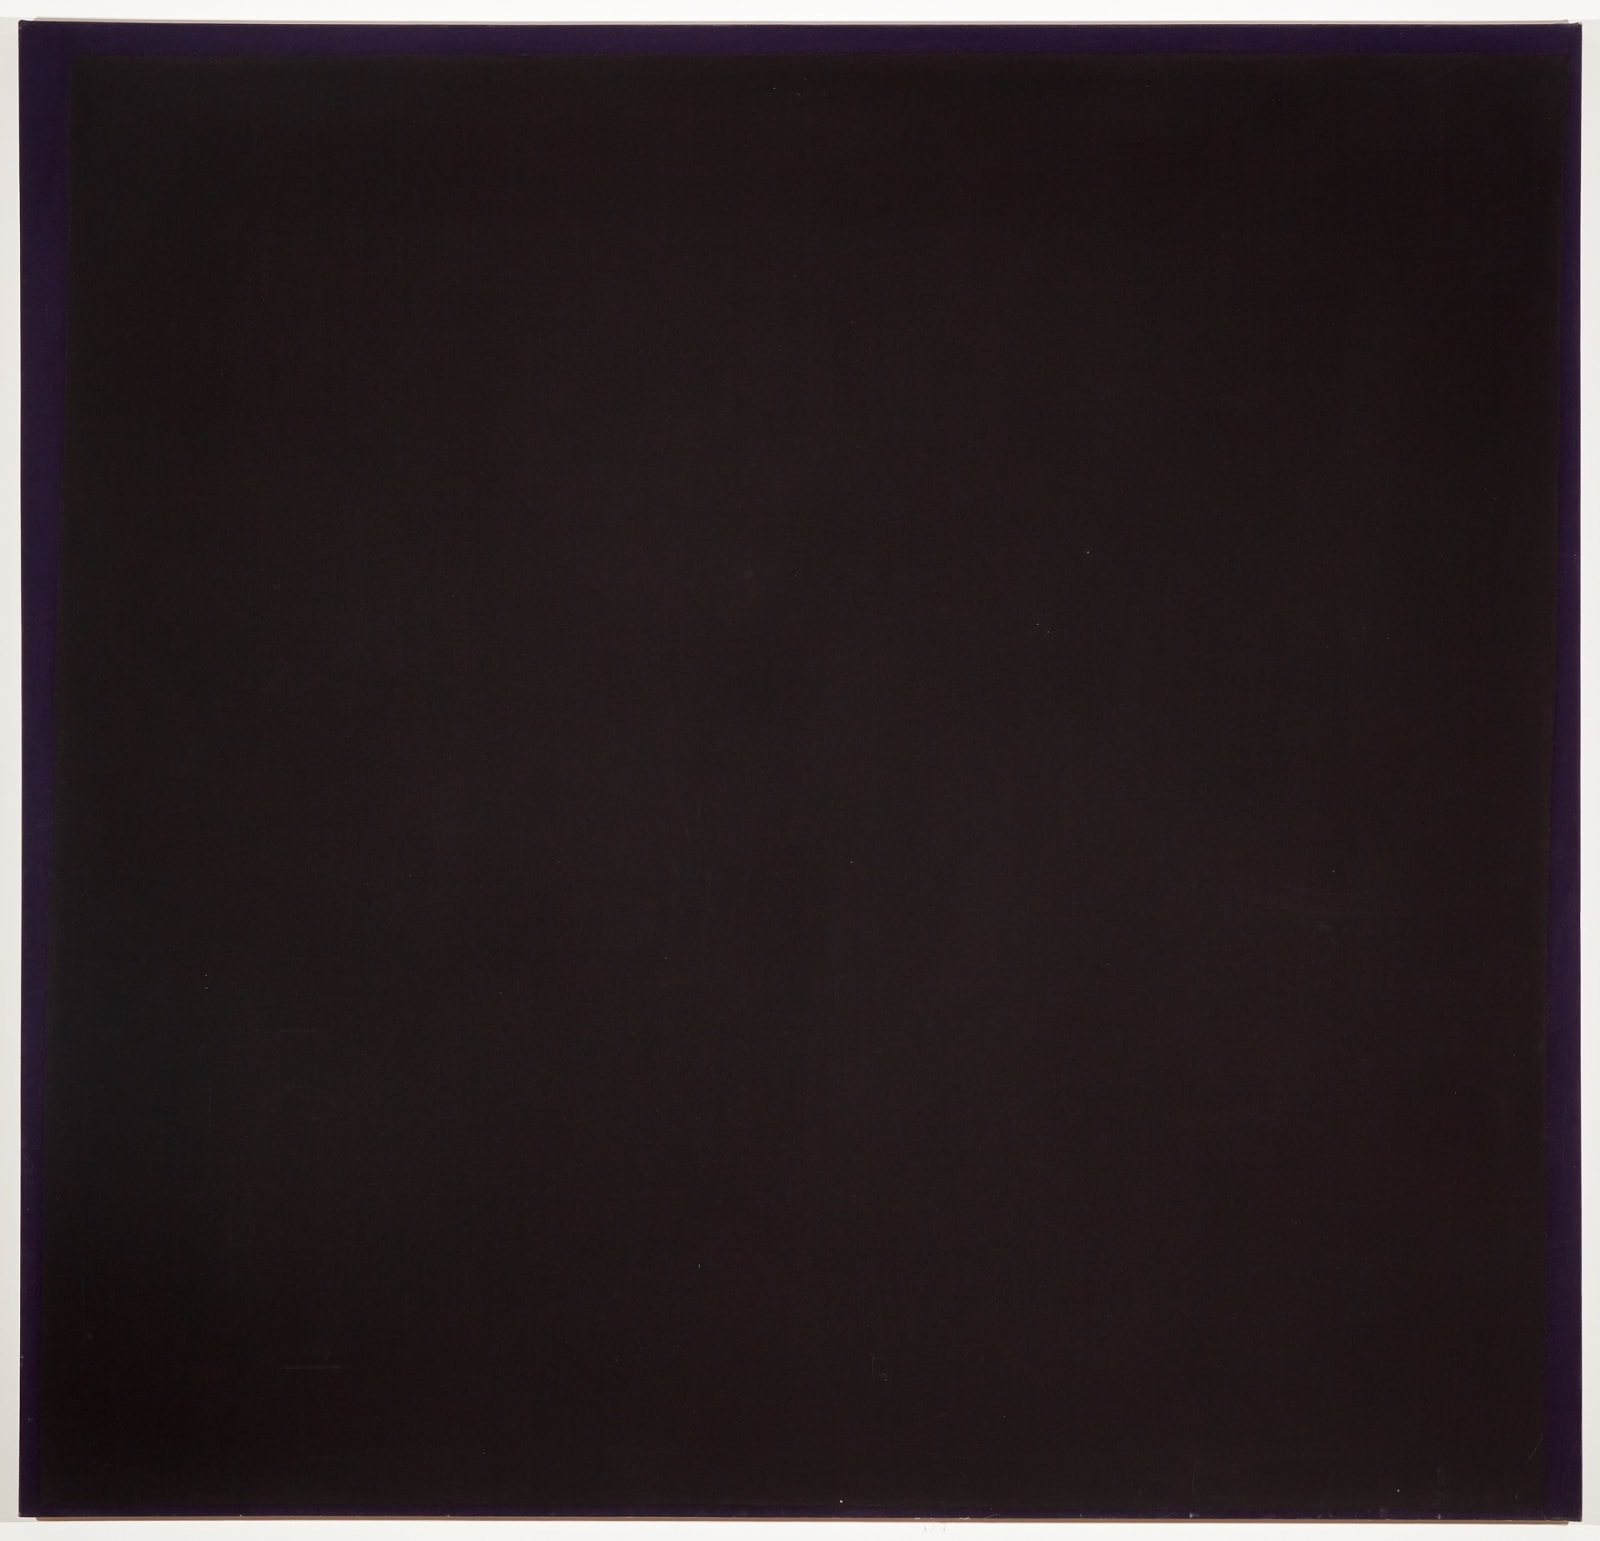 No.48 Black Red, Violet, Purple, 1966 acrylic on canvas 176.64 x 175.26 cm. 69 1/2 x 69 in.